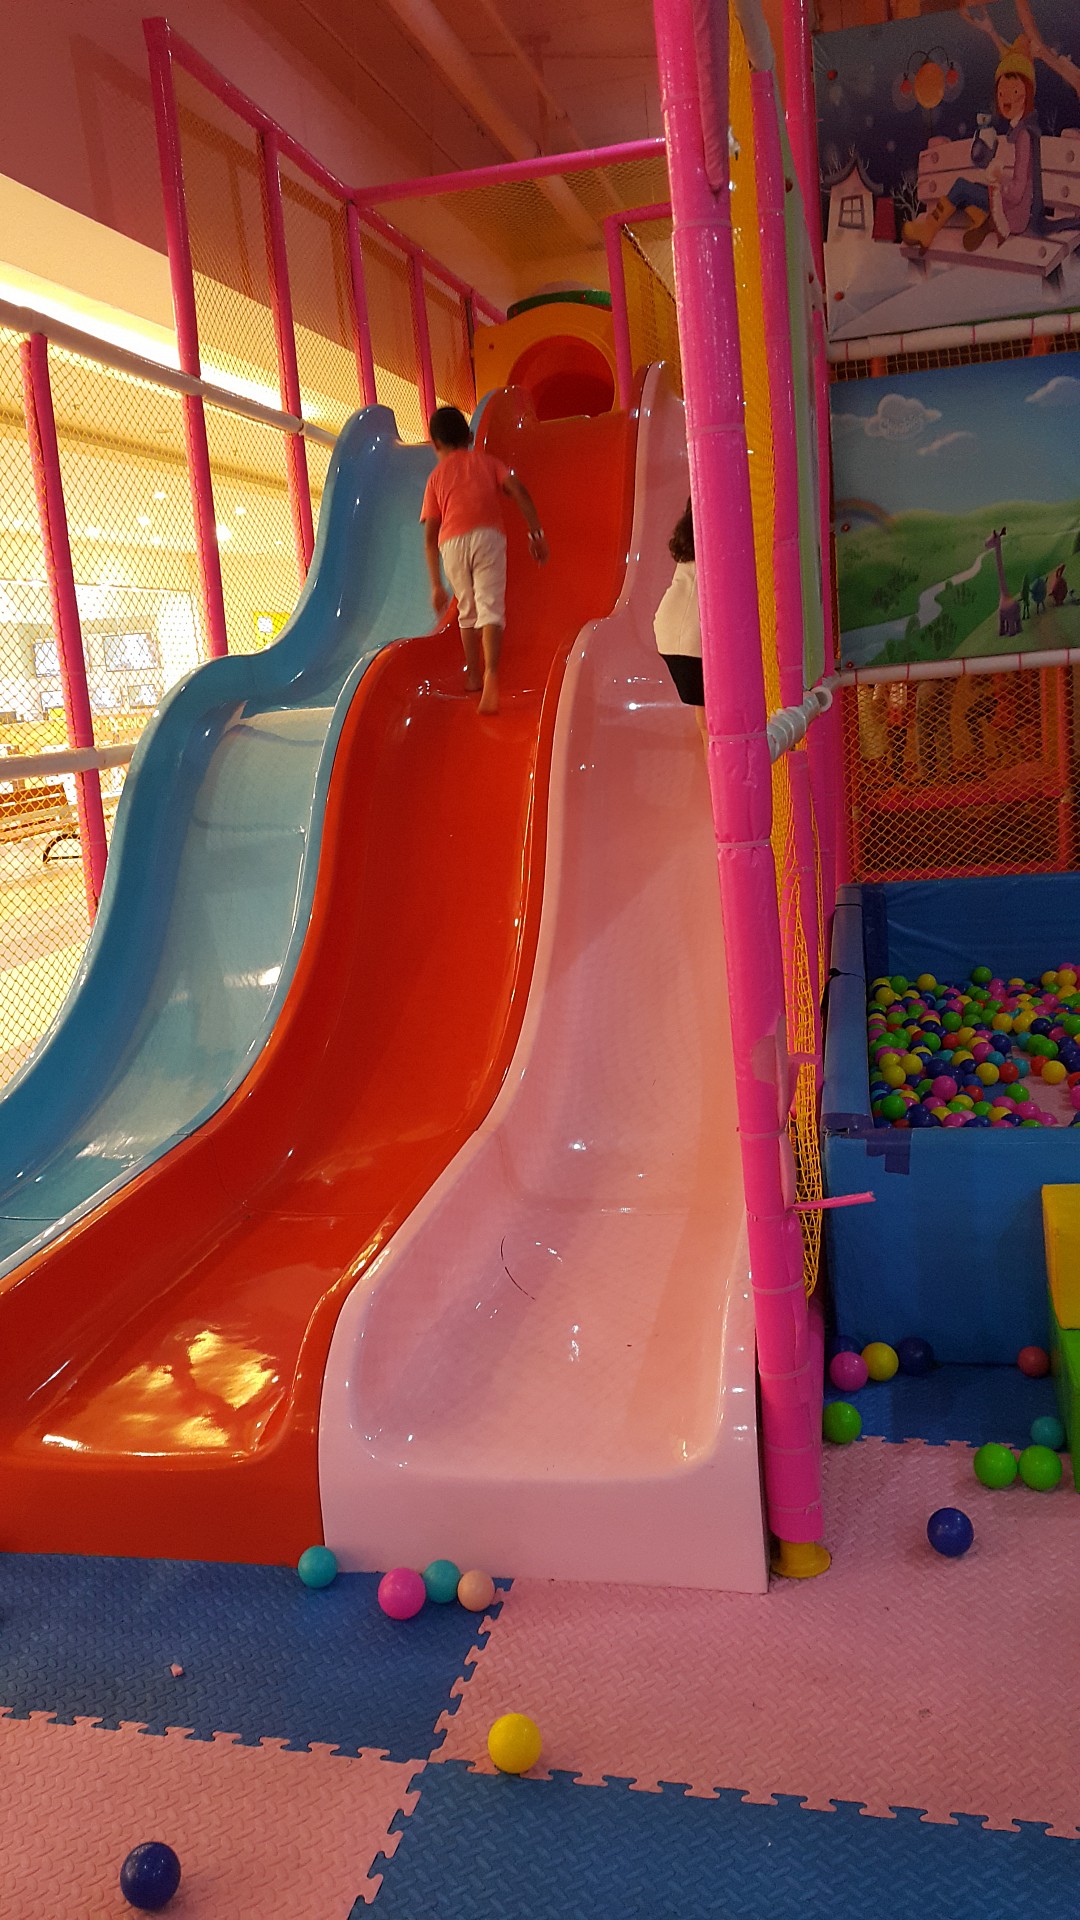 I think when i was a kid was playing on slides in a wrong direction 😒 @ Smart Fox - Bahrain